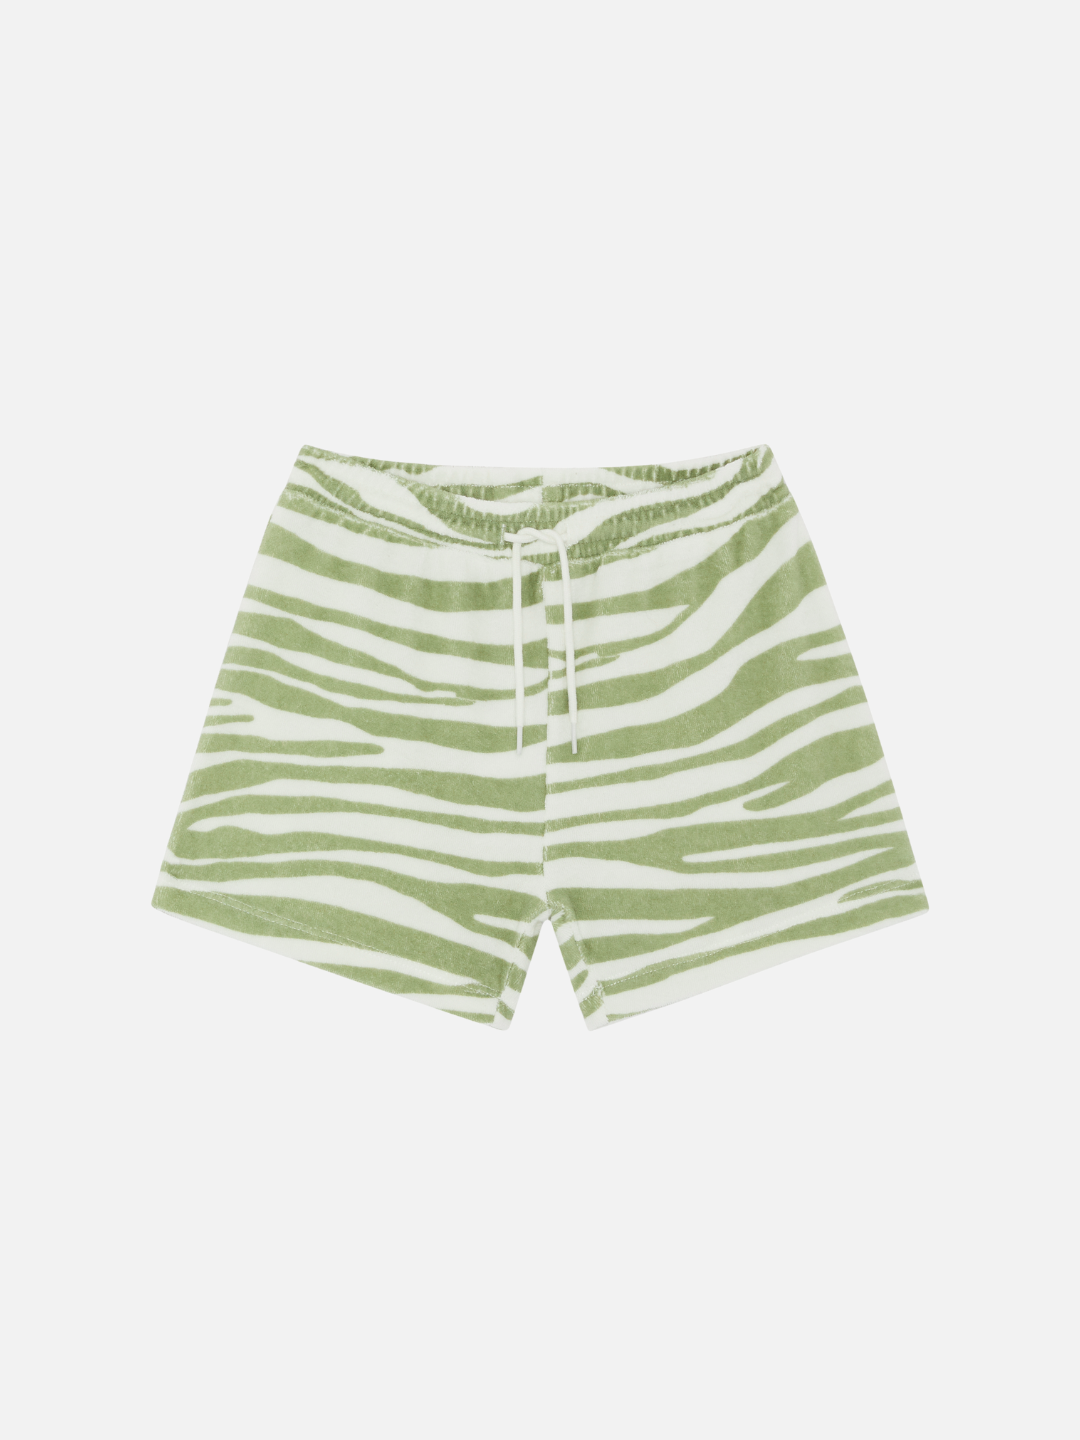 Tiger | A front view of the kid's terry towel shorts in green tiger